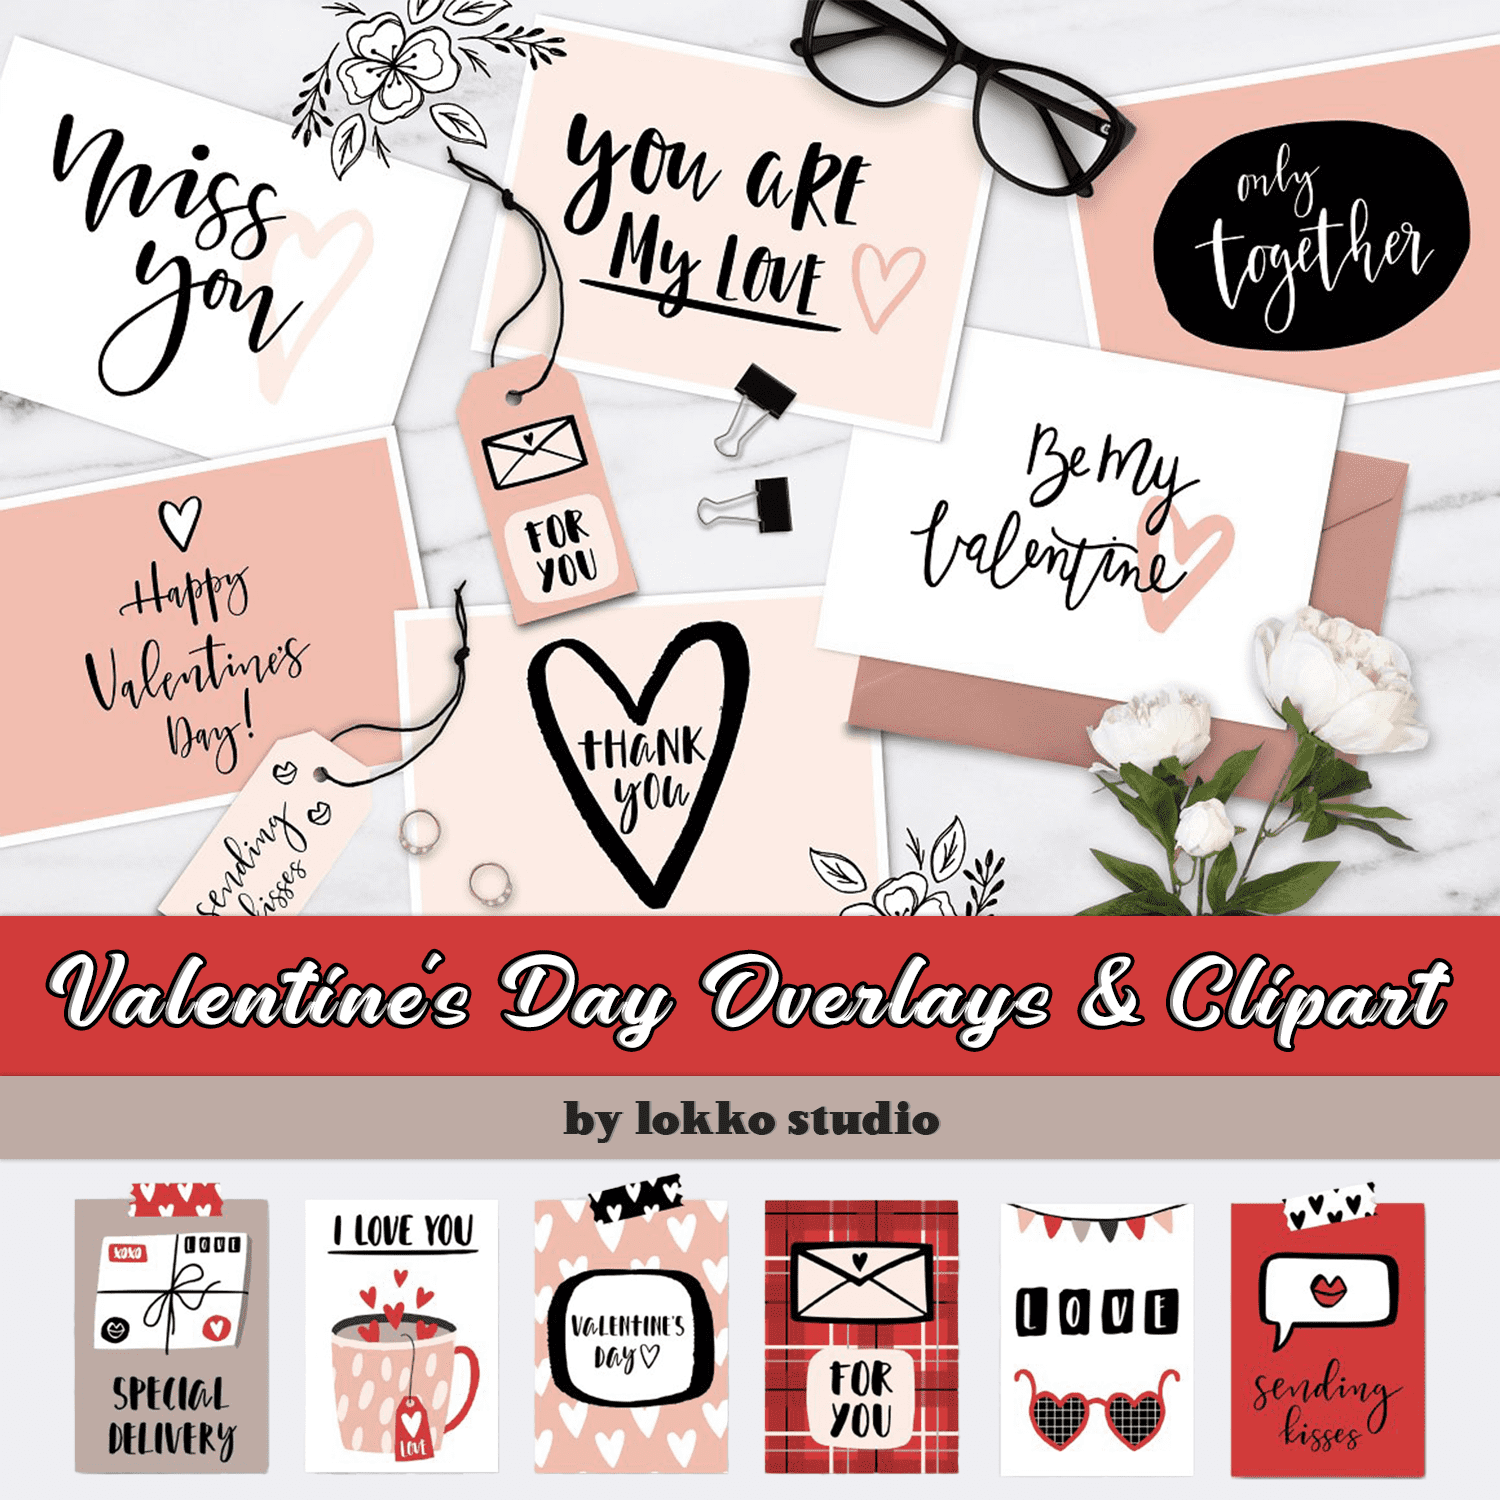 Valentine's Day Overlays & Clipart Cover.